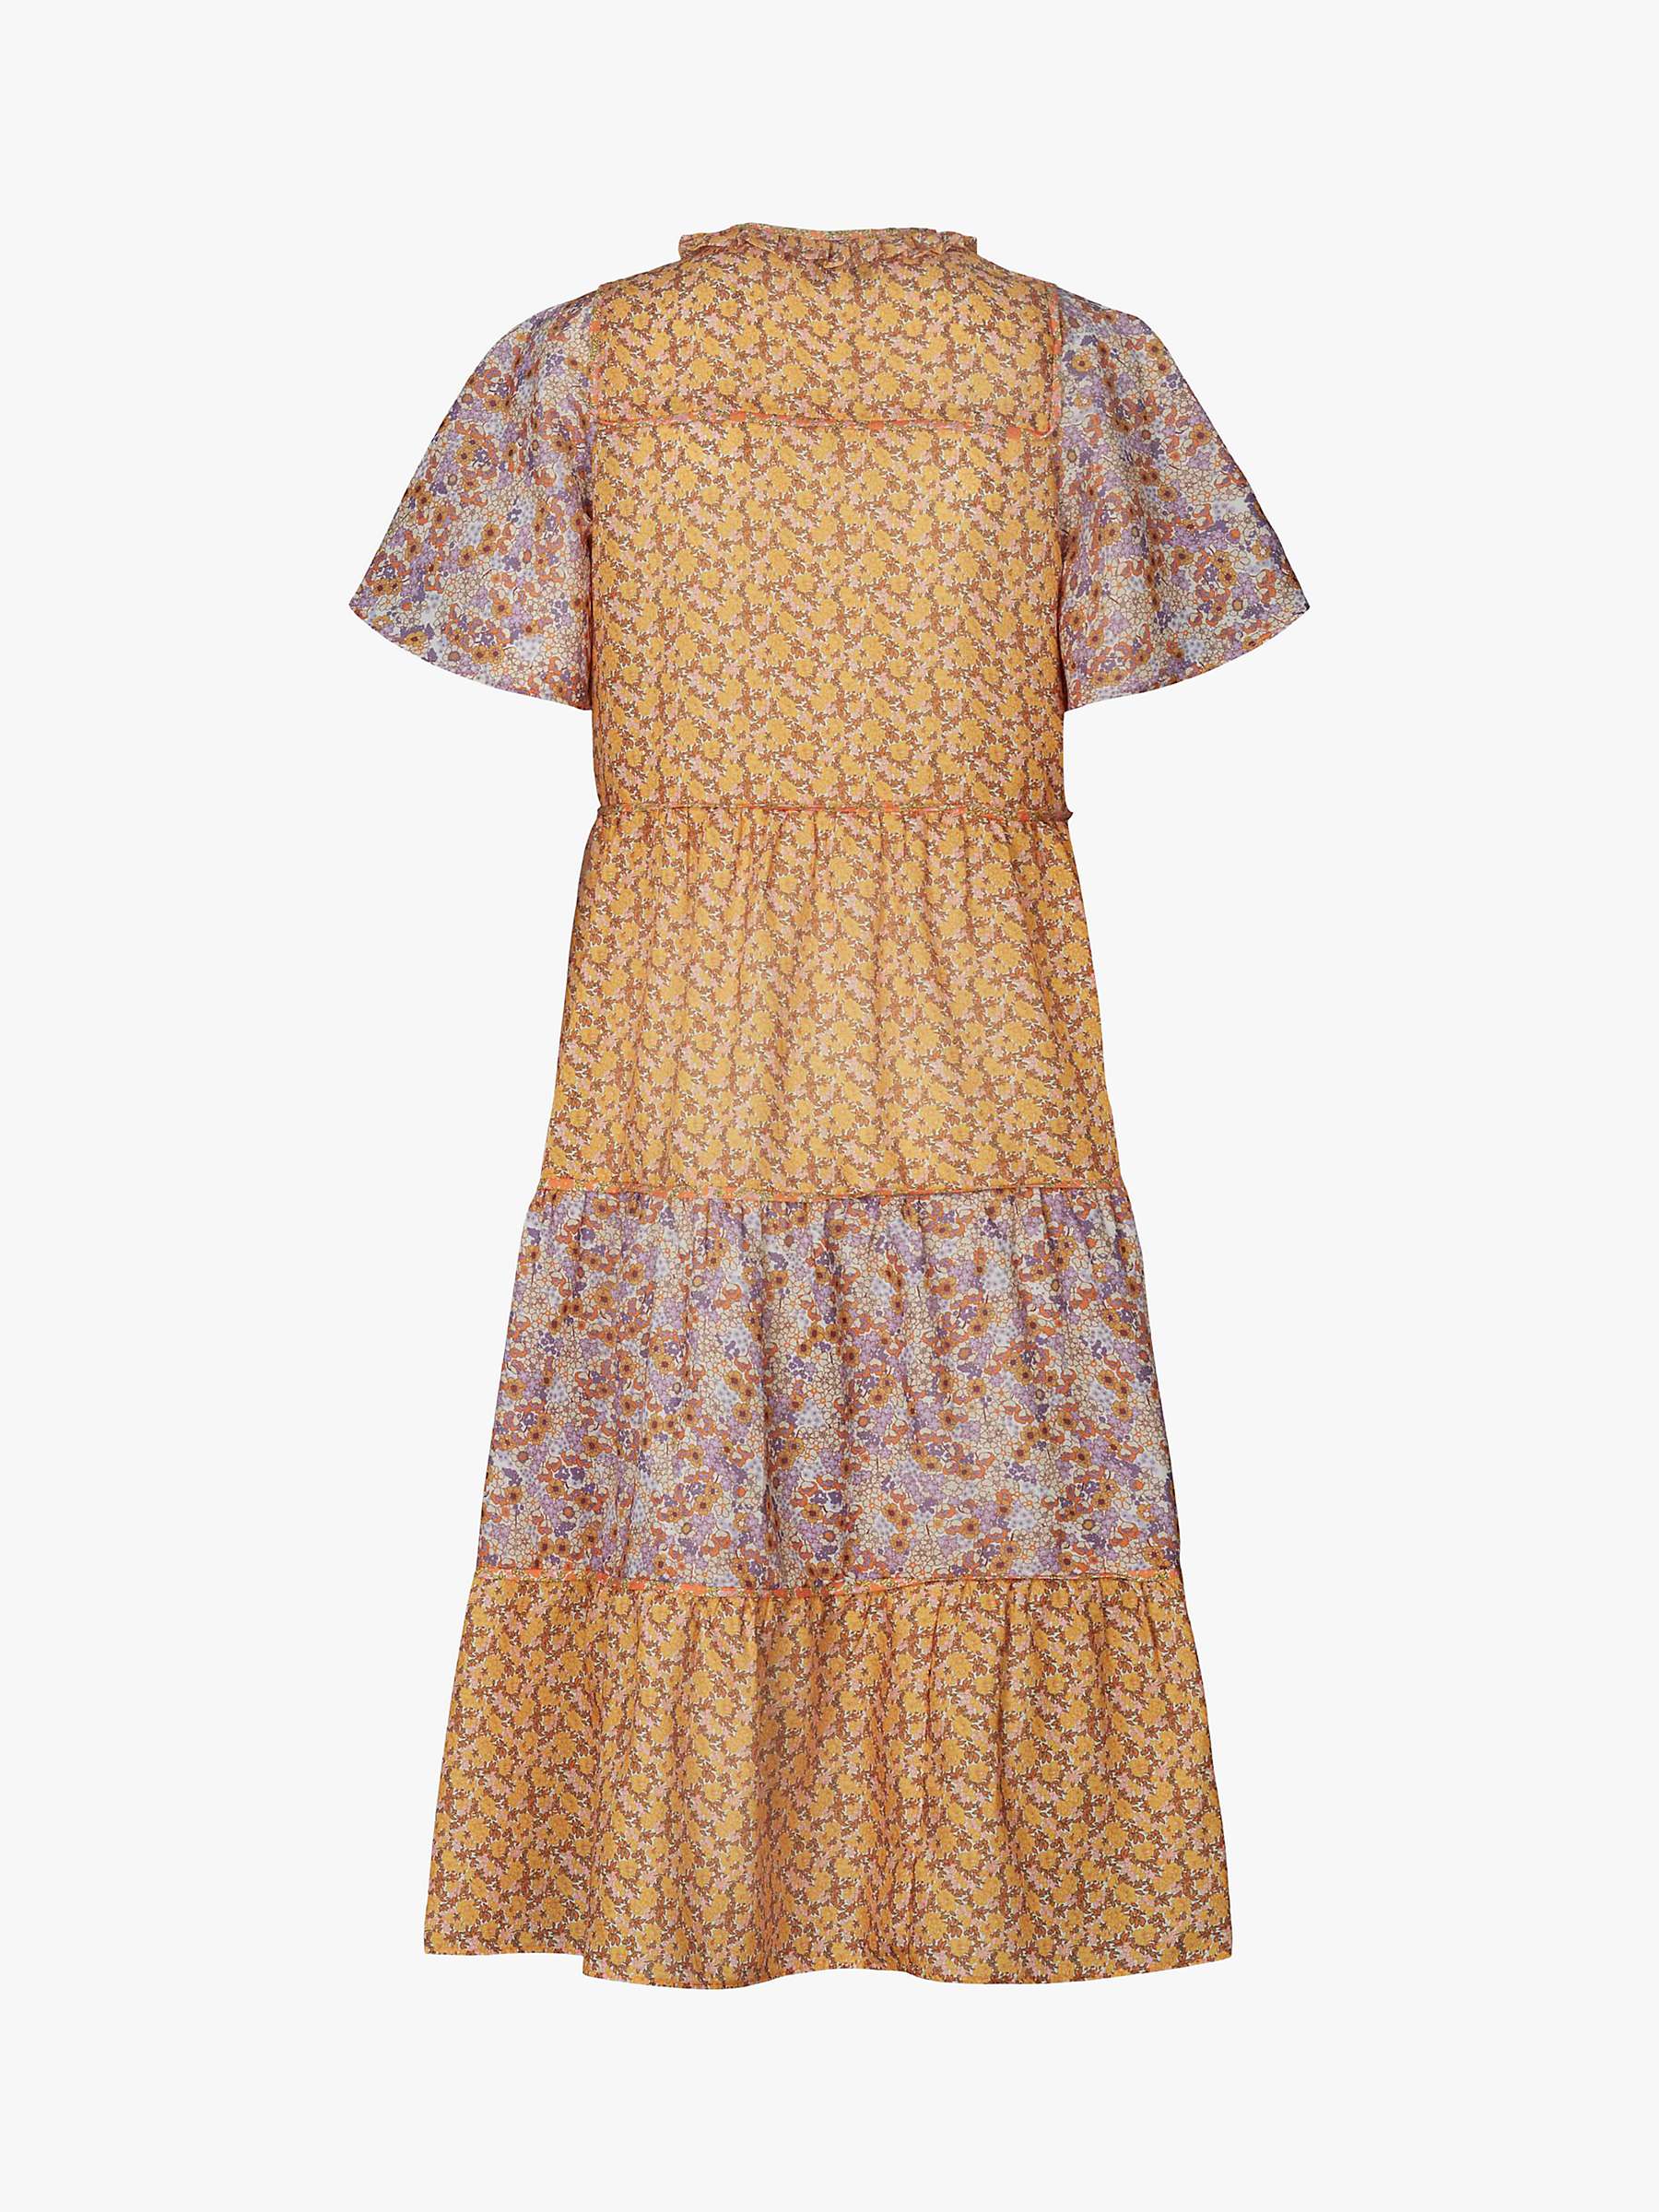 Buy Lollys Laundry Godwin Floral Tiered Dress, Yellow/Multi Online at johnlewis.com